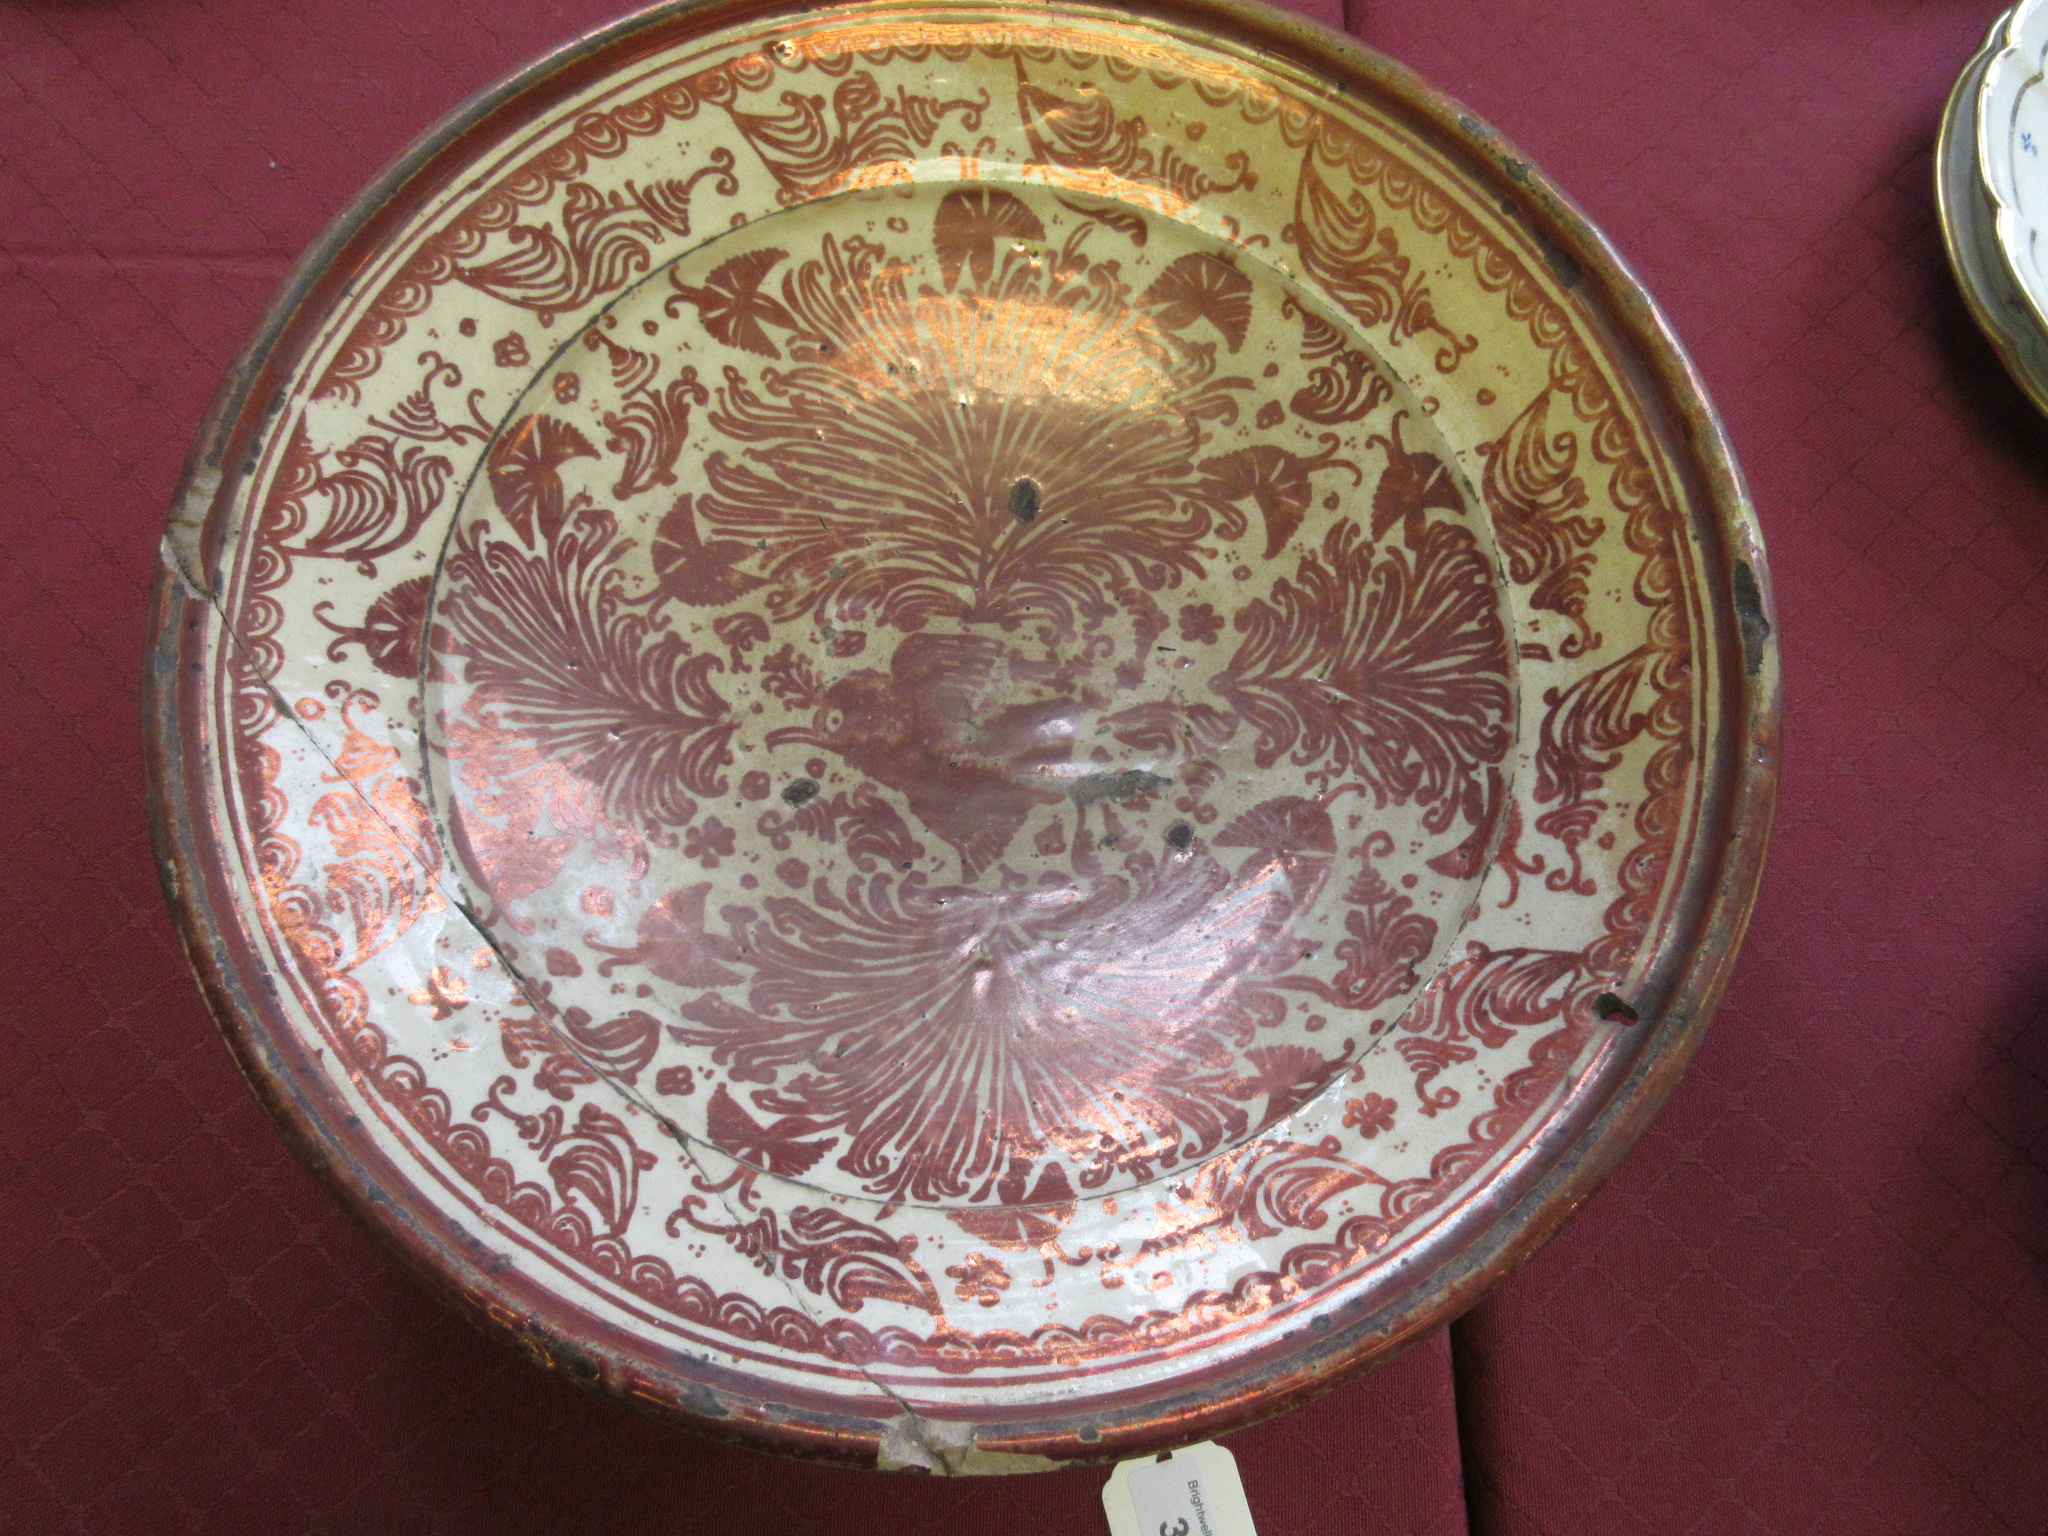 A 17th century Hispano-Moresque lustre Bowl, probably Manises (Valencia), painted in ruby lustre - Image 2 of 6